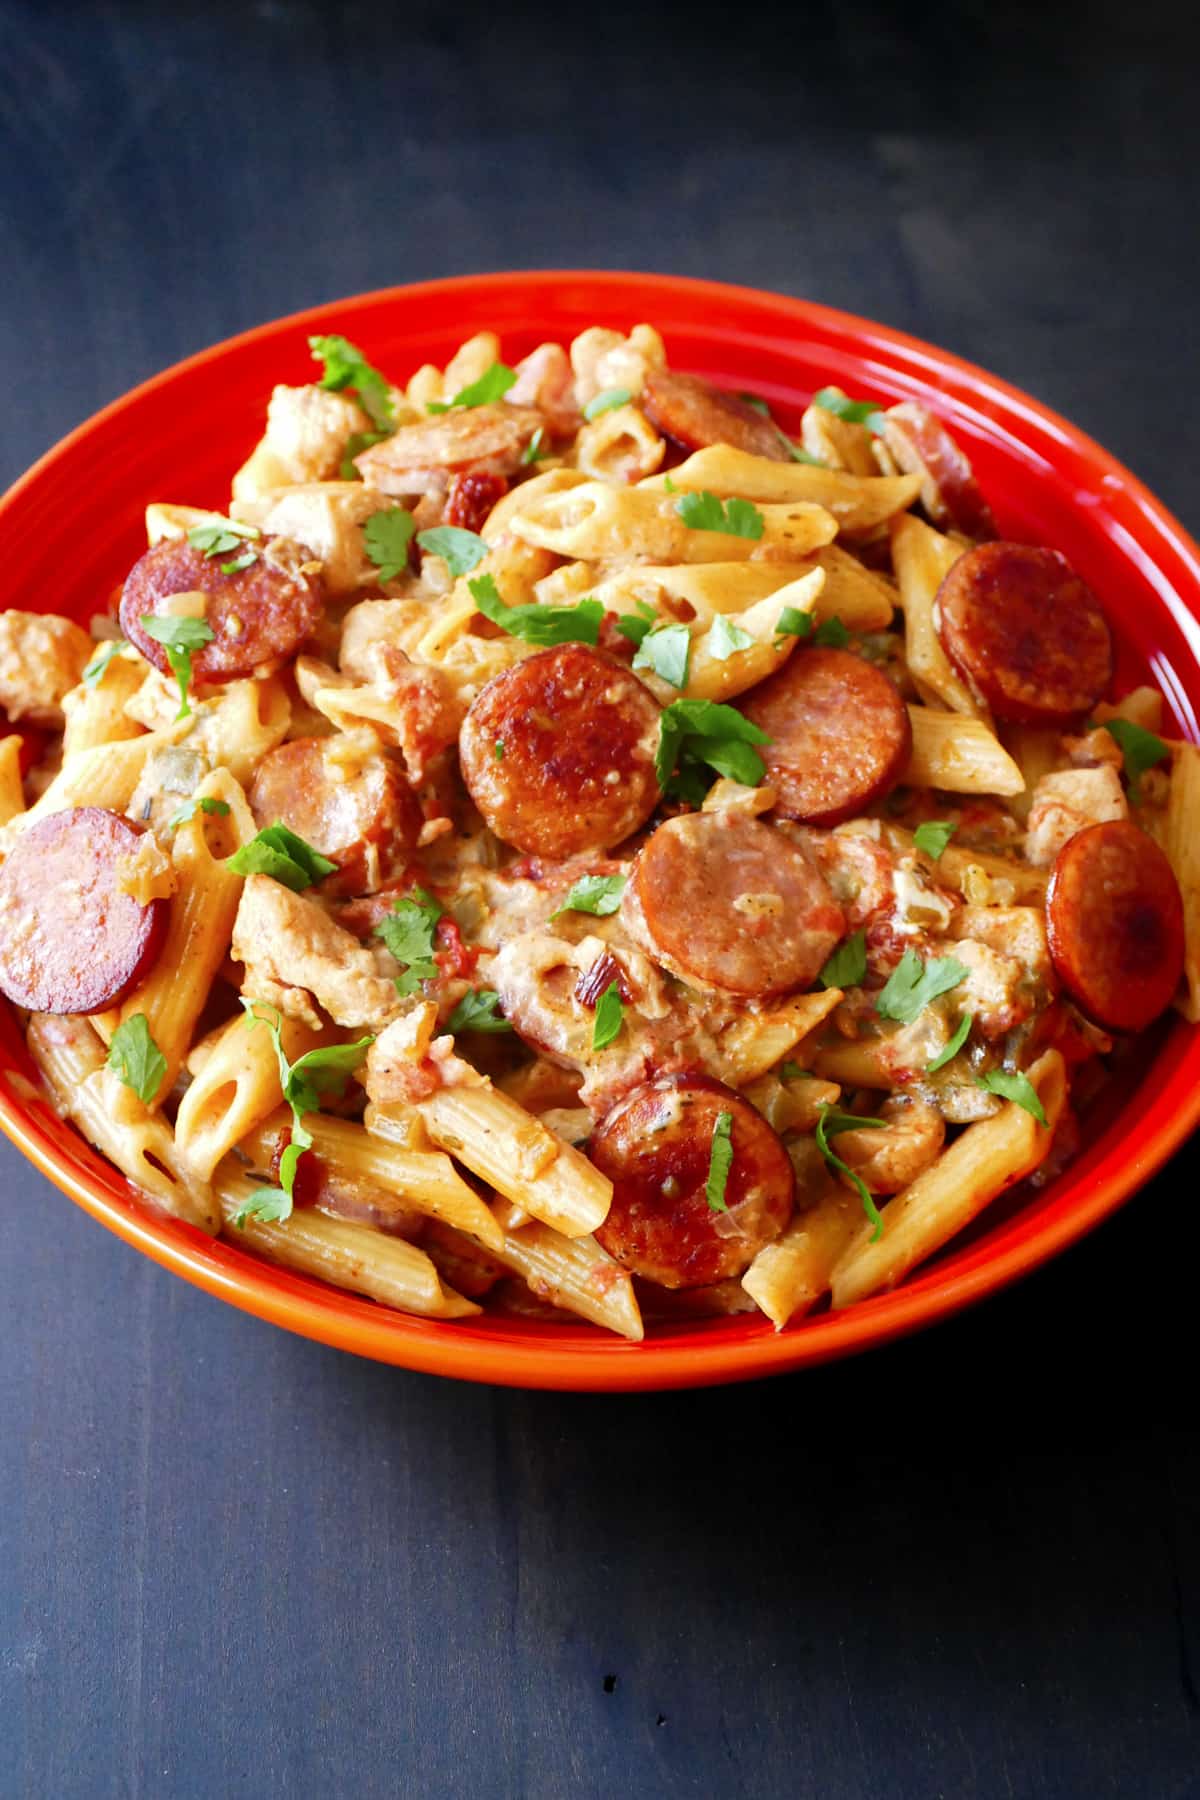 Instant Pot Cajun chicken pasta in red bowl with pasta, sausage, chicken, garnished with parsley.